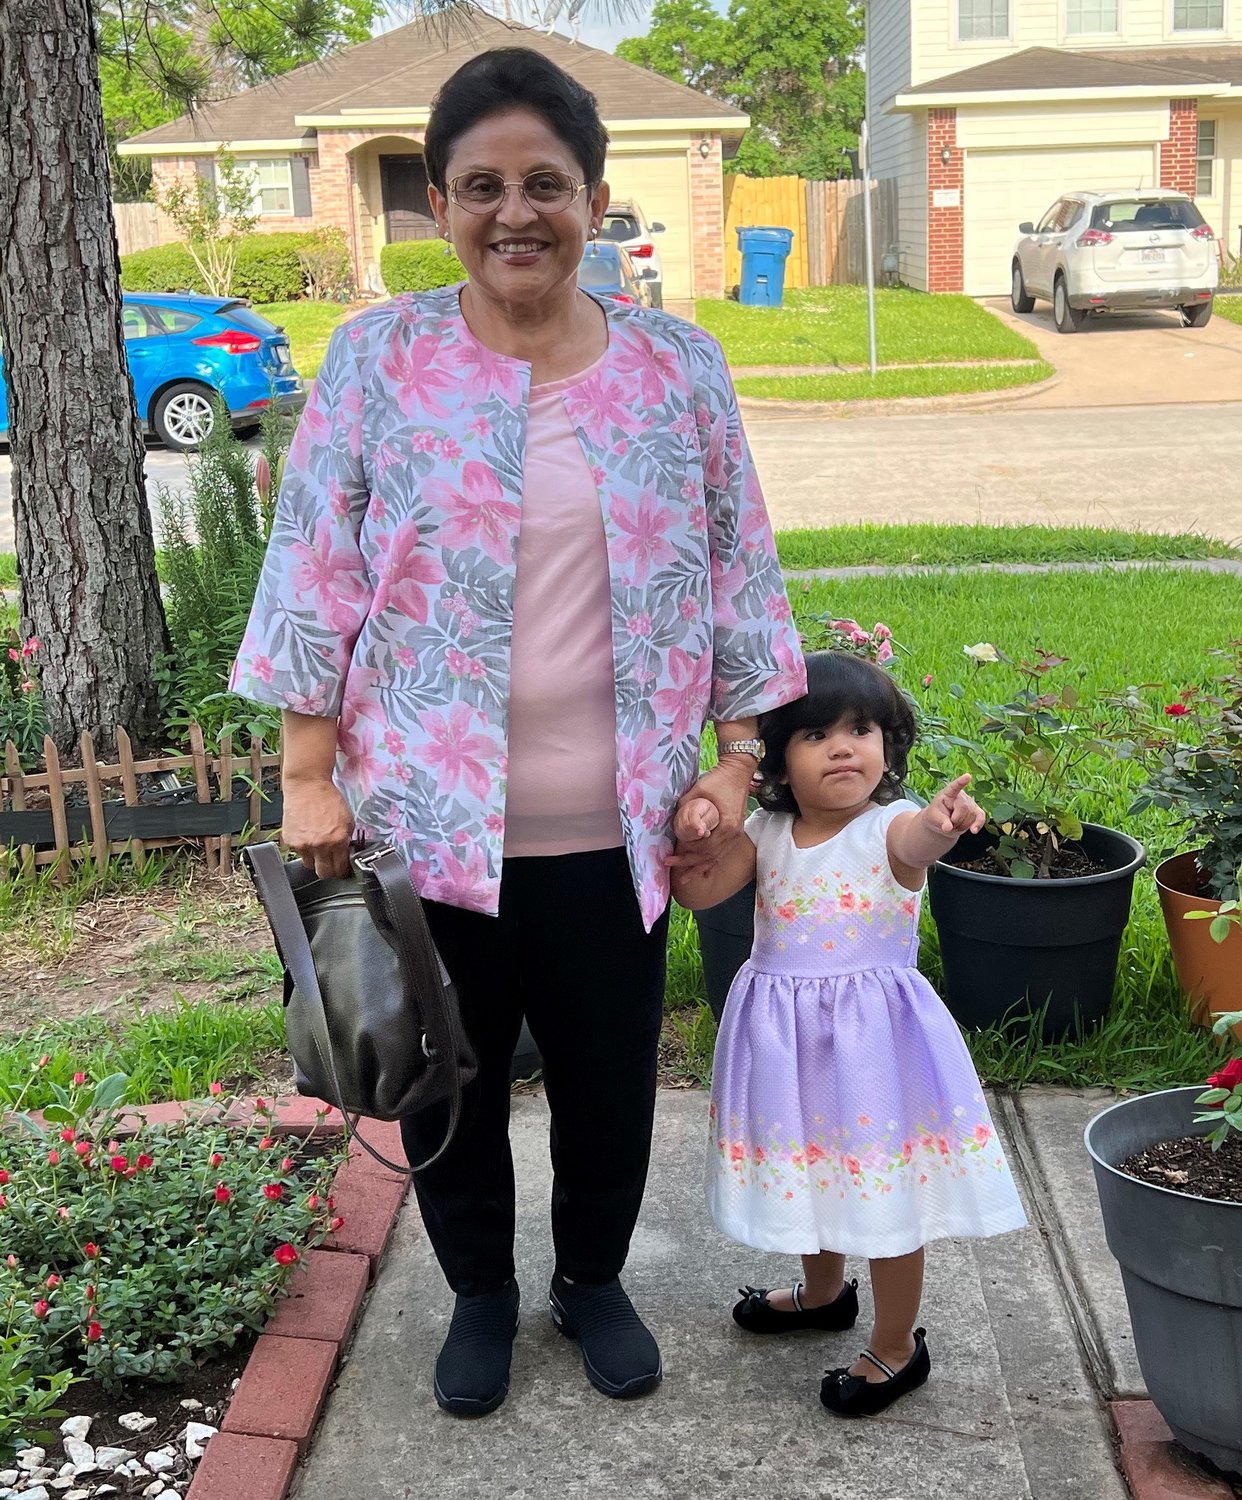 Fanny Baltanado, shown with her granddaughter, volunteered to help with Cross Community Church’s back-to-school ESL class for elementary students after taking an adult ESL class there.